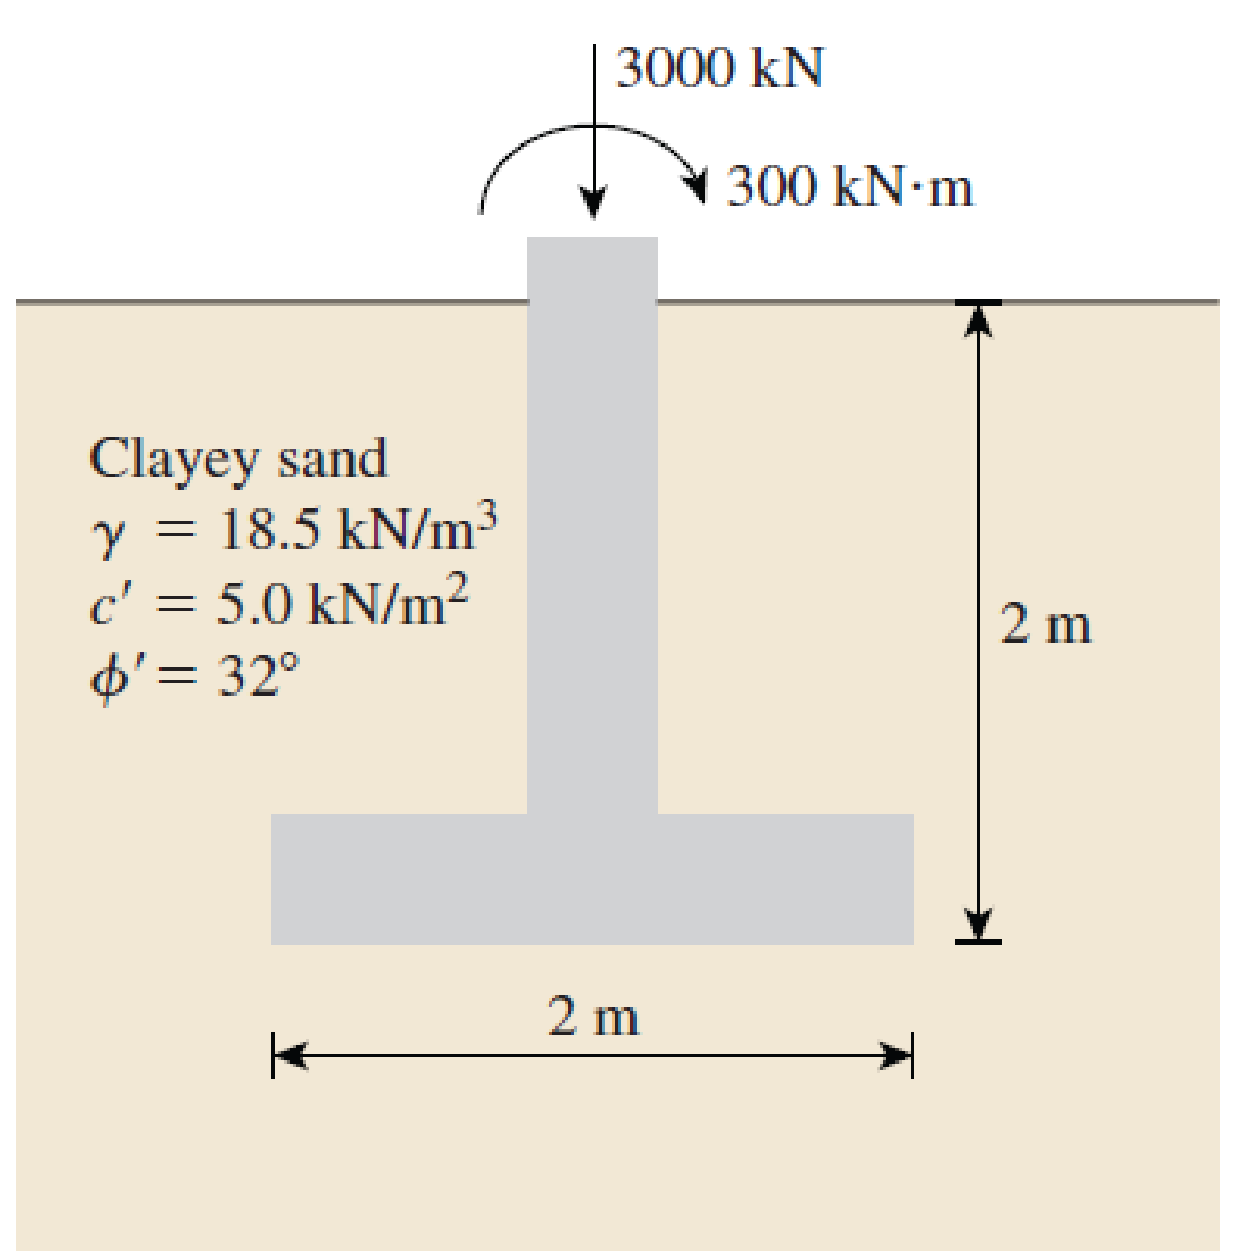 Chapter 6, Problem 6.14P, A 2 m  3 m spread footing placed at a depth of 2 m carries a vertical load of 3000 kN and a moment 